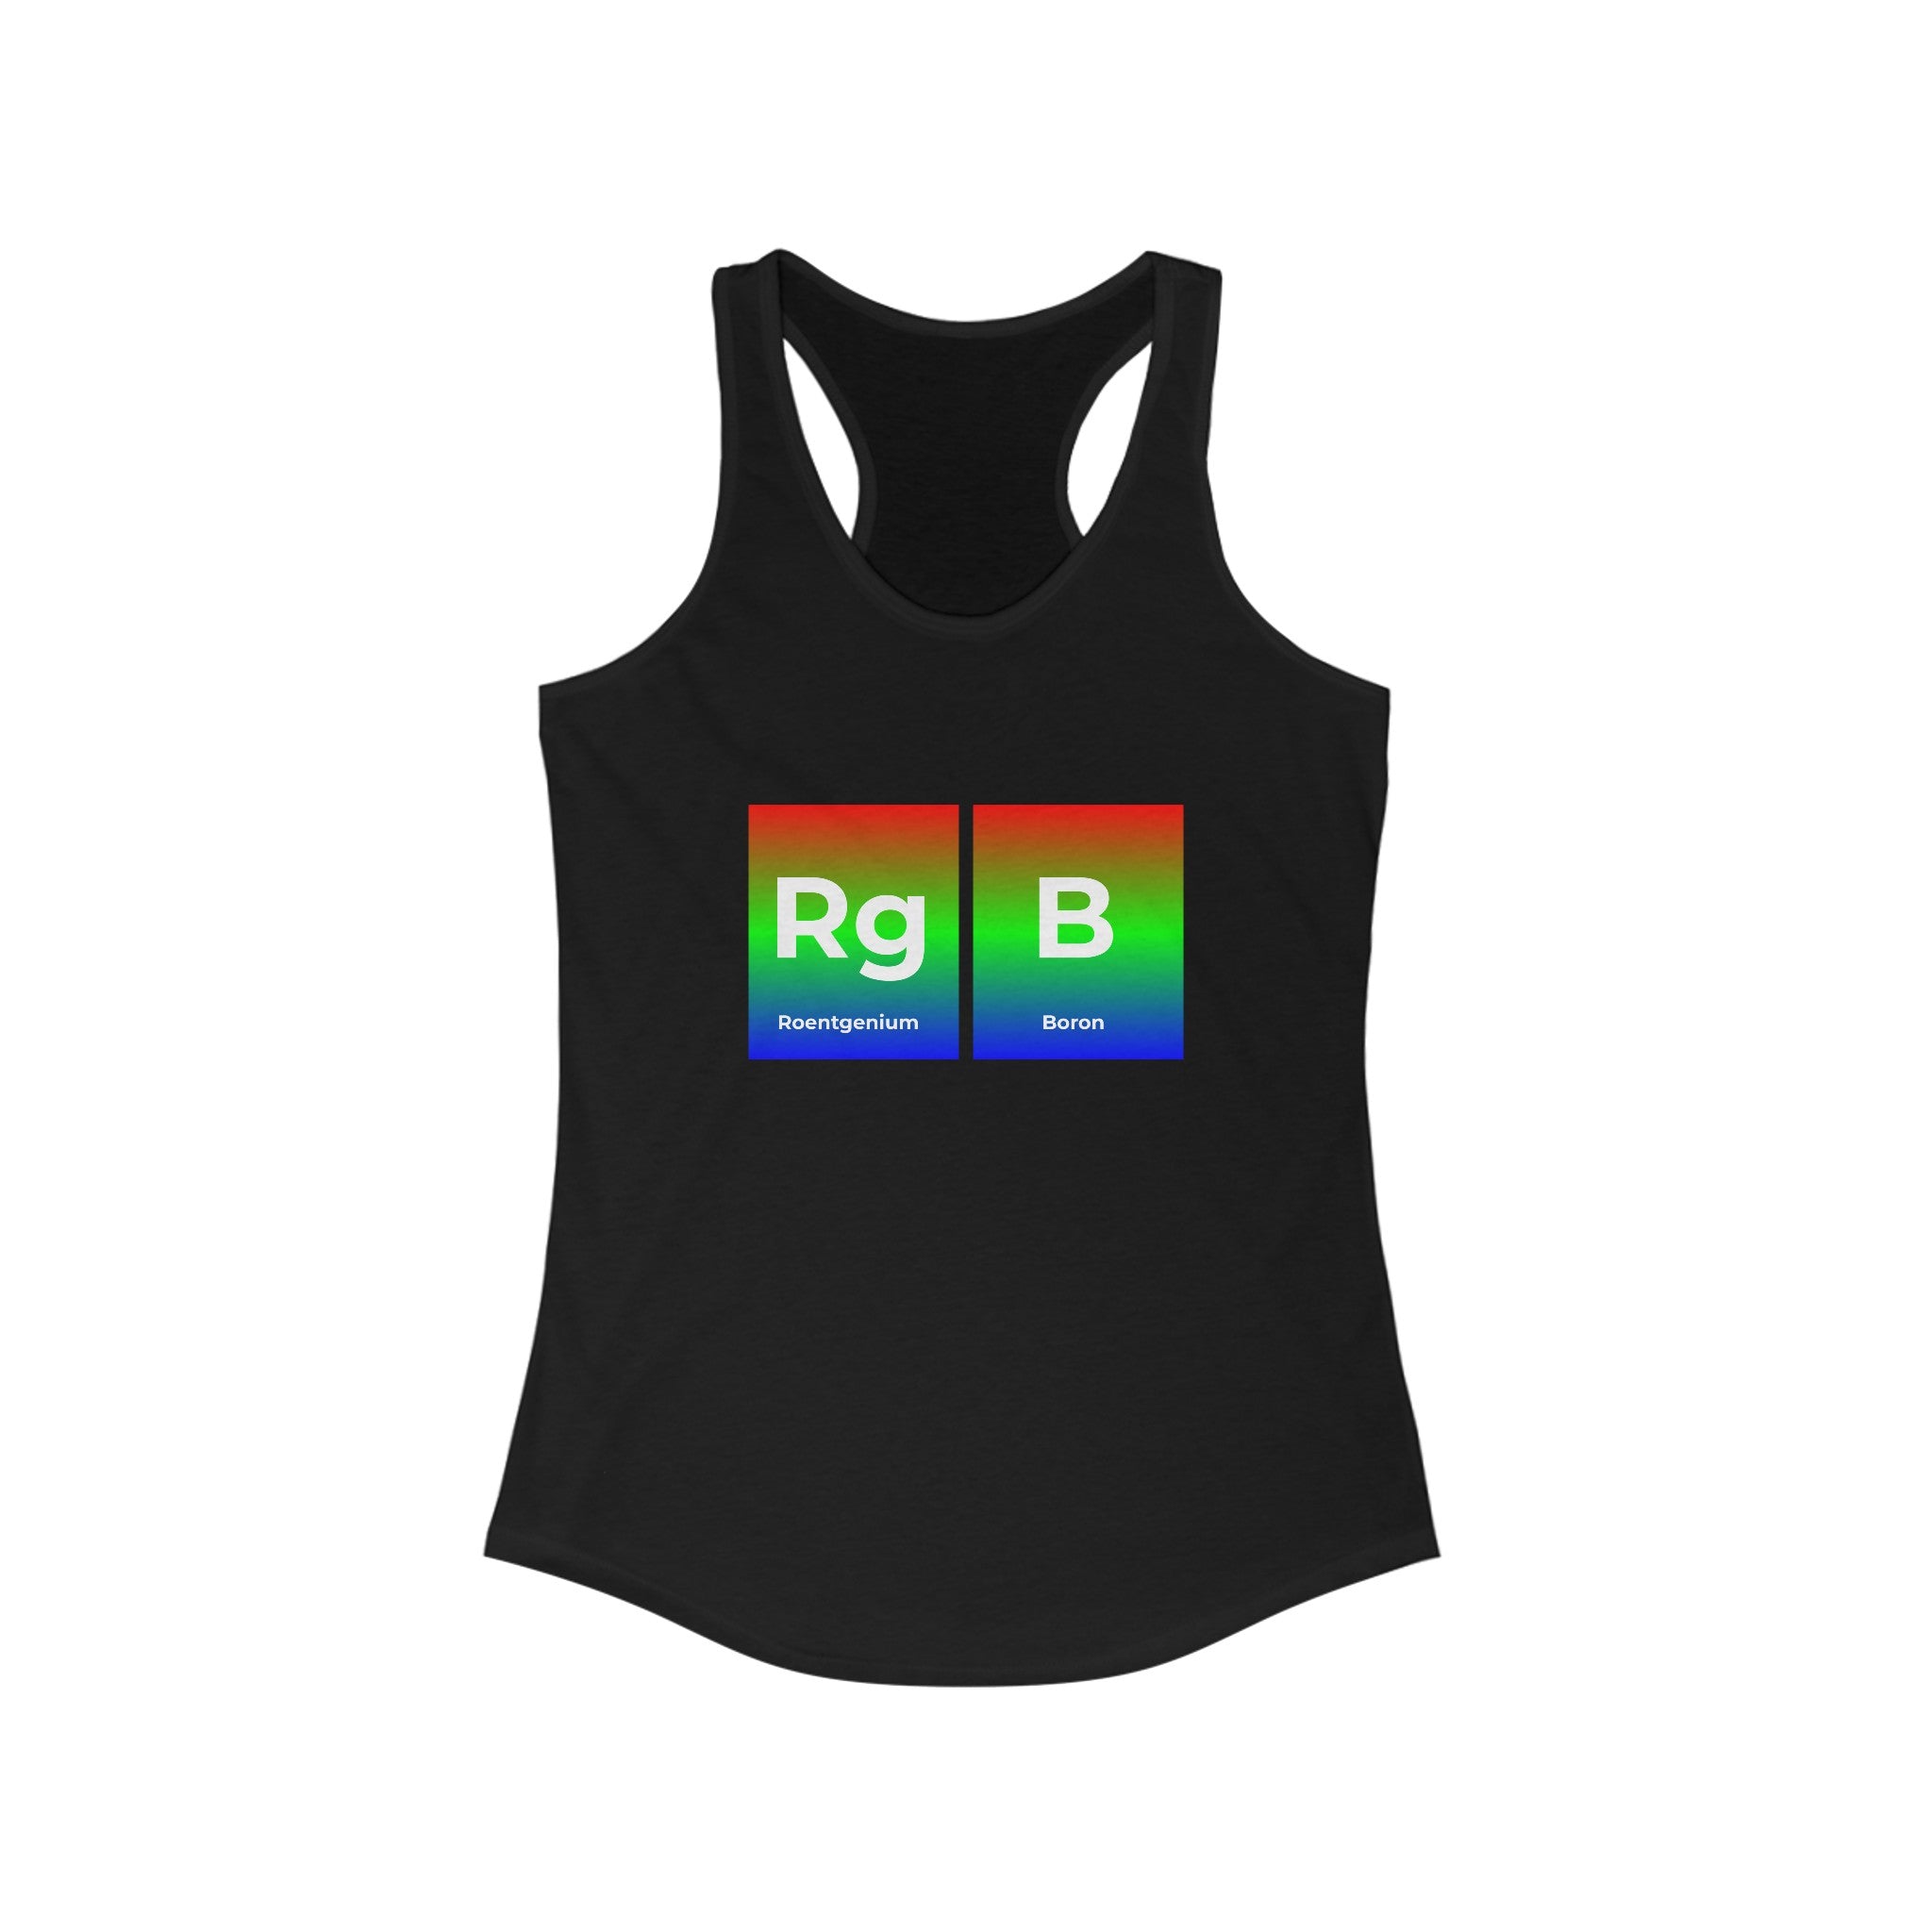 RG-B - Women's Racerback Tank featuring a black sleeveless design with a periodic table-inspired print displaying "Rg" for Roentgenium and "B" for Boron, set against a high-quality color gradient background transitioning from red to green to blue. Perfect for an active lifestyle.